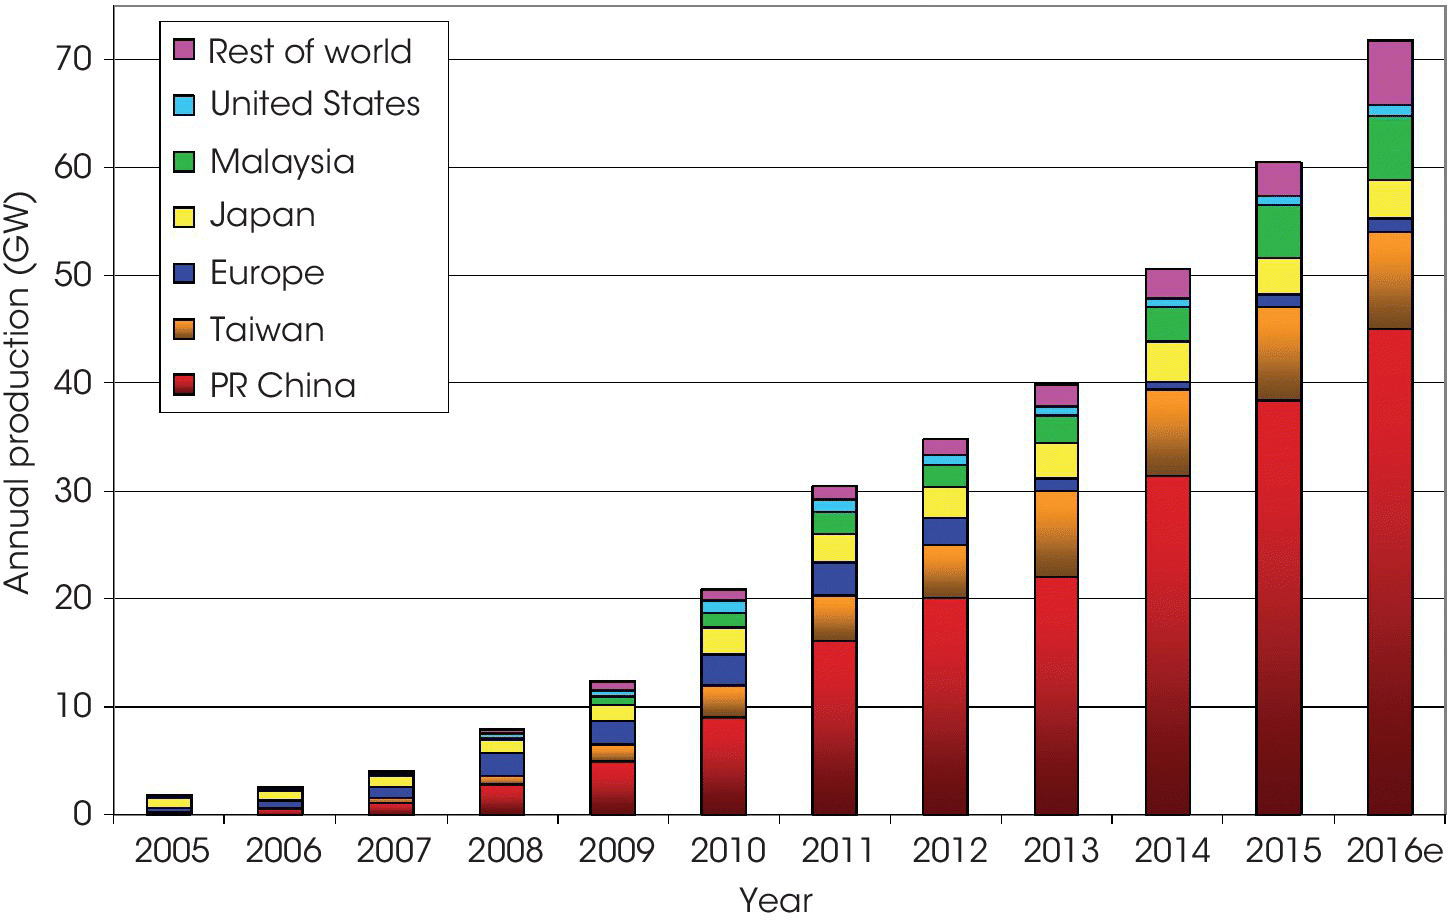 Staked bar graph illustrating left-skewed distribution of annual production of PR China, Taiwan, Europe, Japan, Malaysia, United States, and Rest of world from 2005 to 2016.